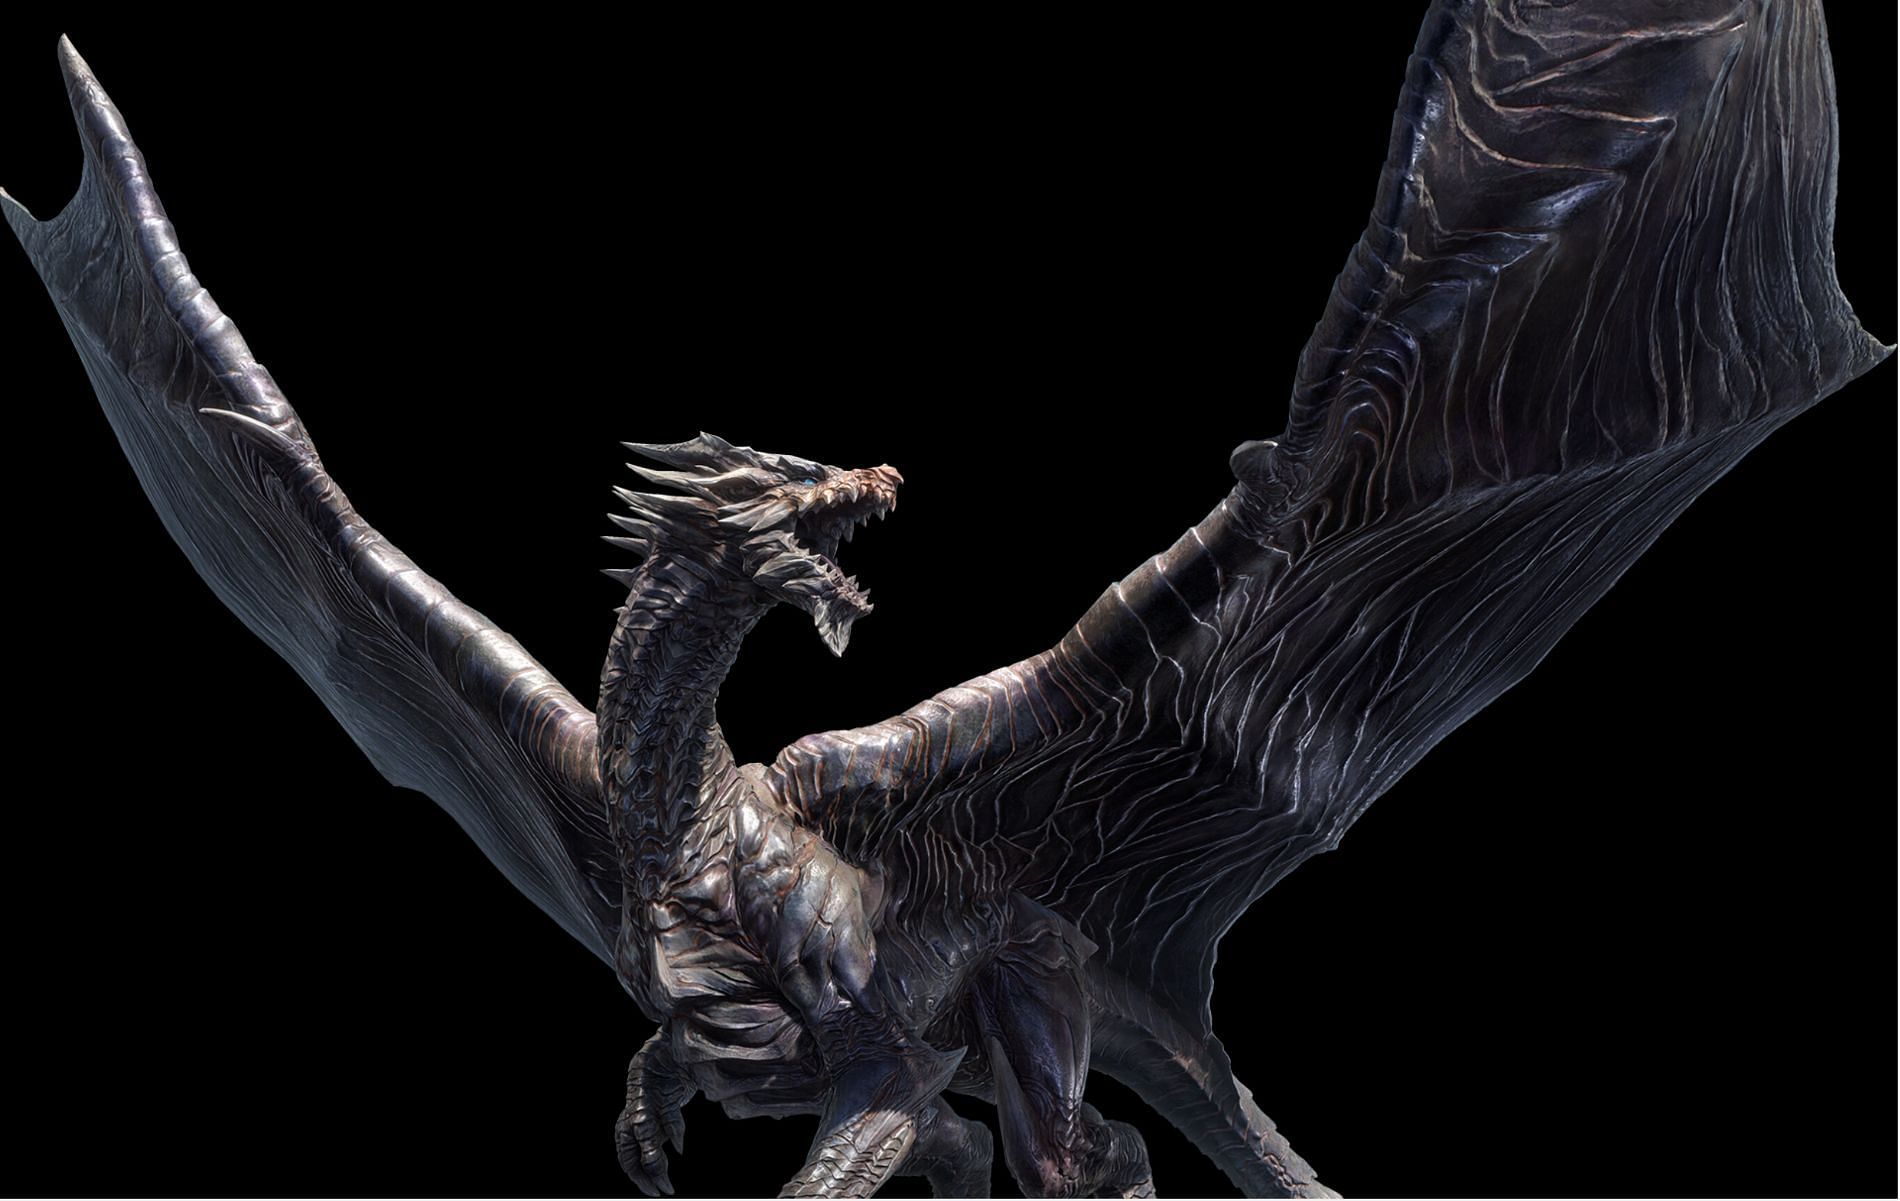 Kushala Daora commands the wind during its battle against the hunters (Image via Capcom)